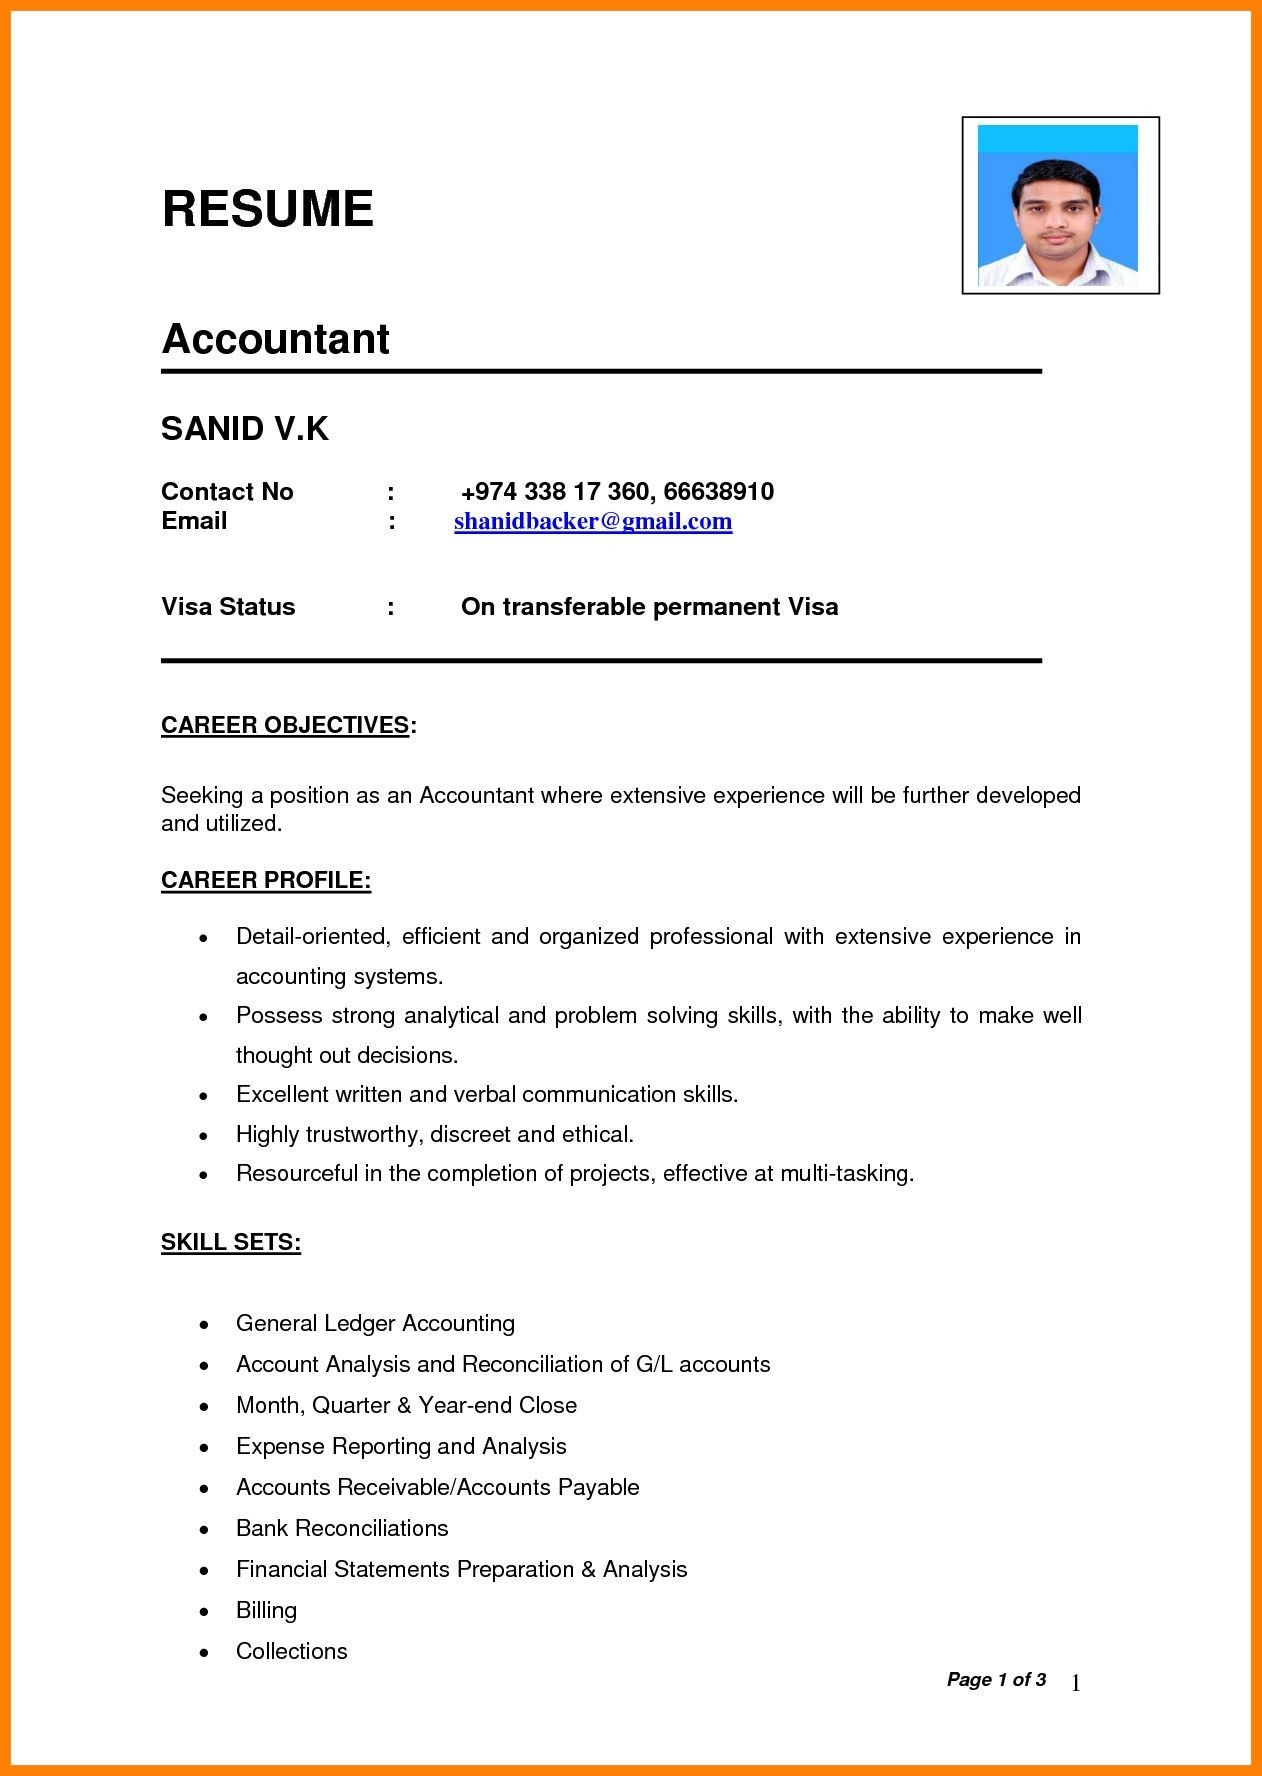 Sample Resume after Career Break India 7 Cv format Pdf Indian Style Resume Template Word, Accountant …